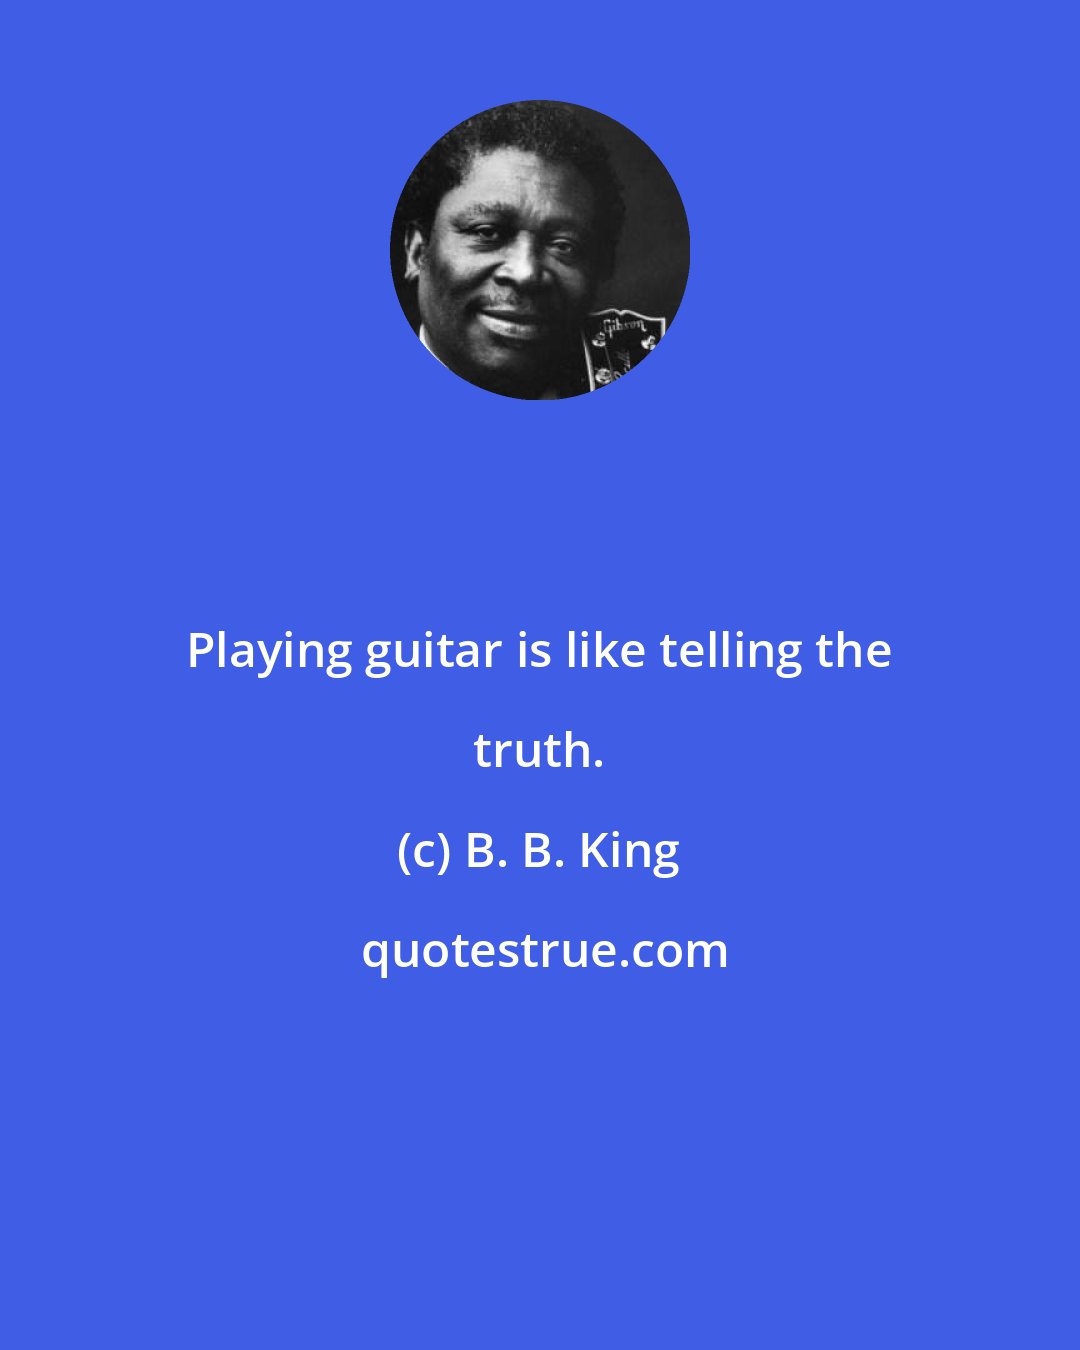 B. B. King: Playing guitar is like telling the truth.